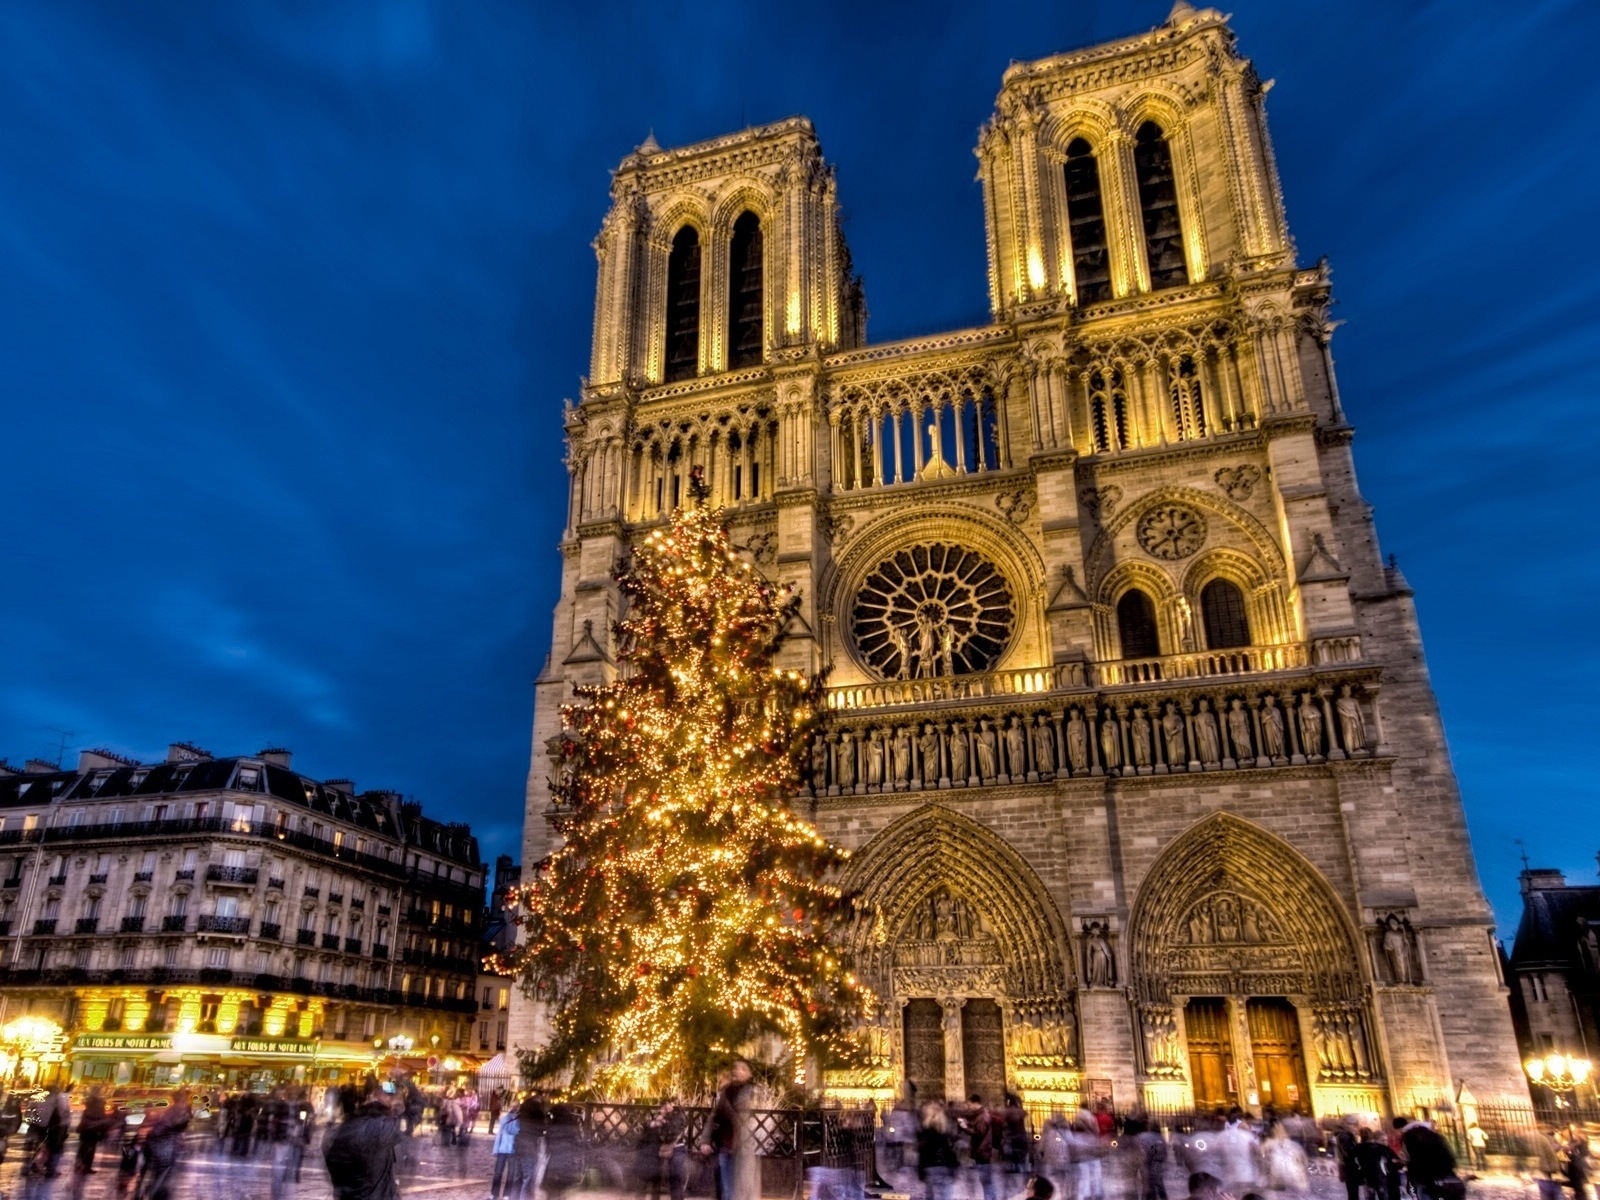 Notre Dame HD Wallpapers #7 - 1600x1200